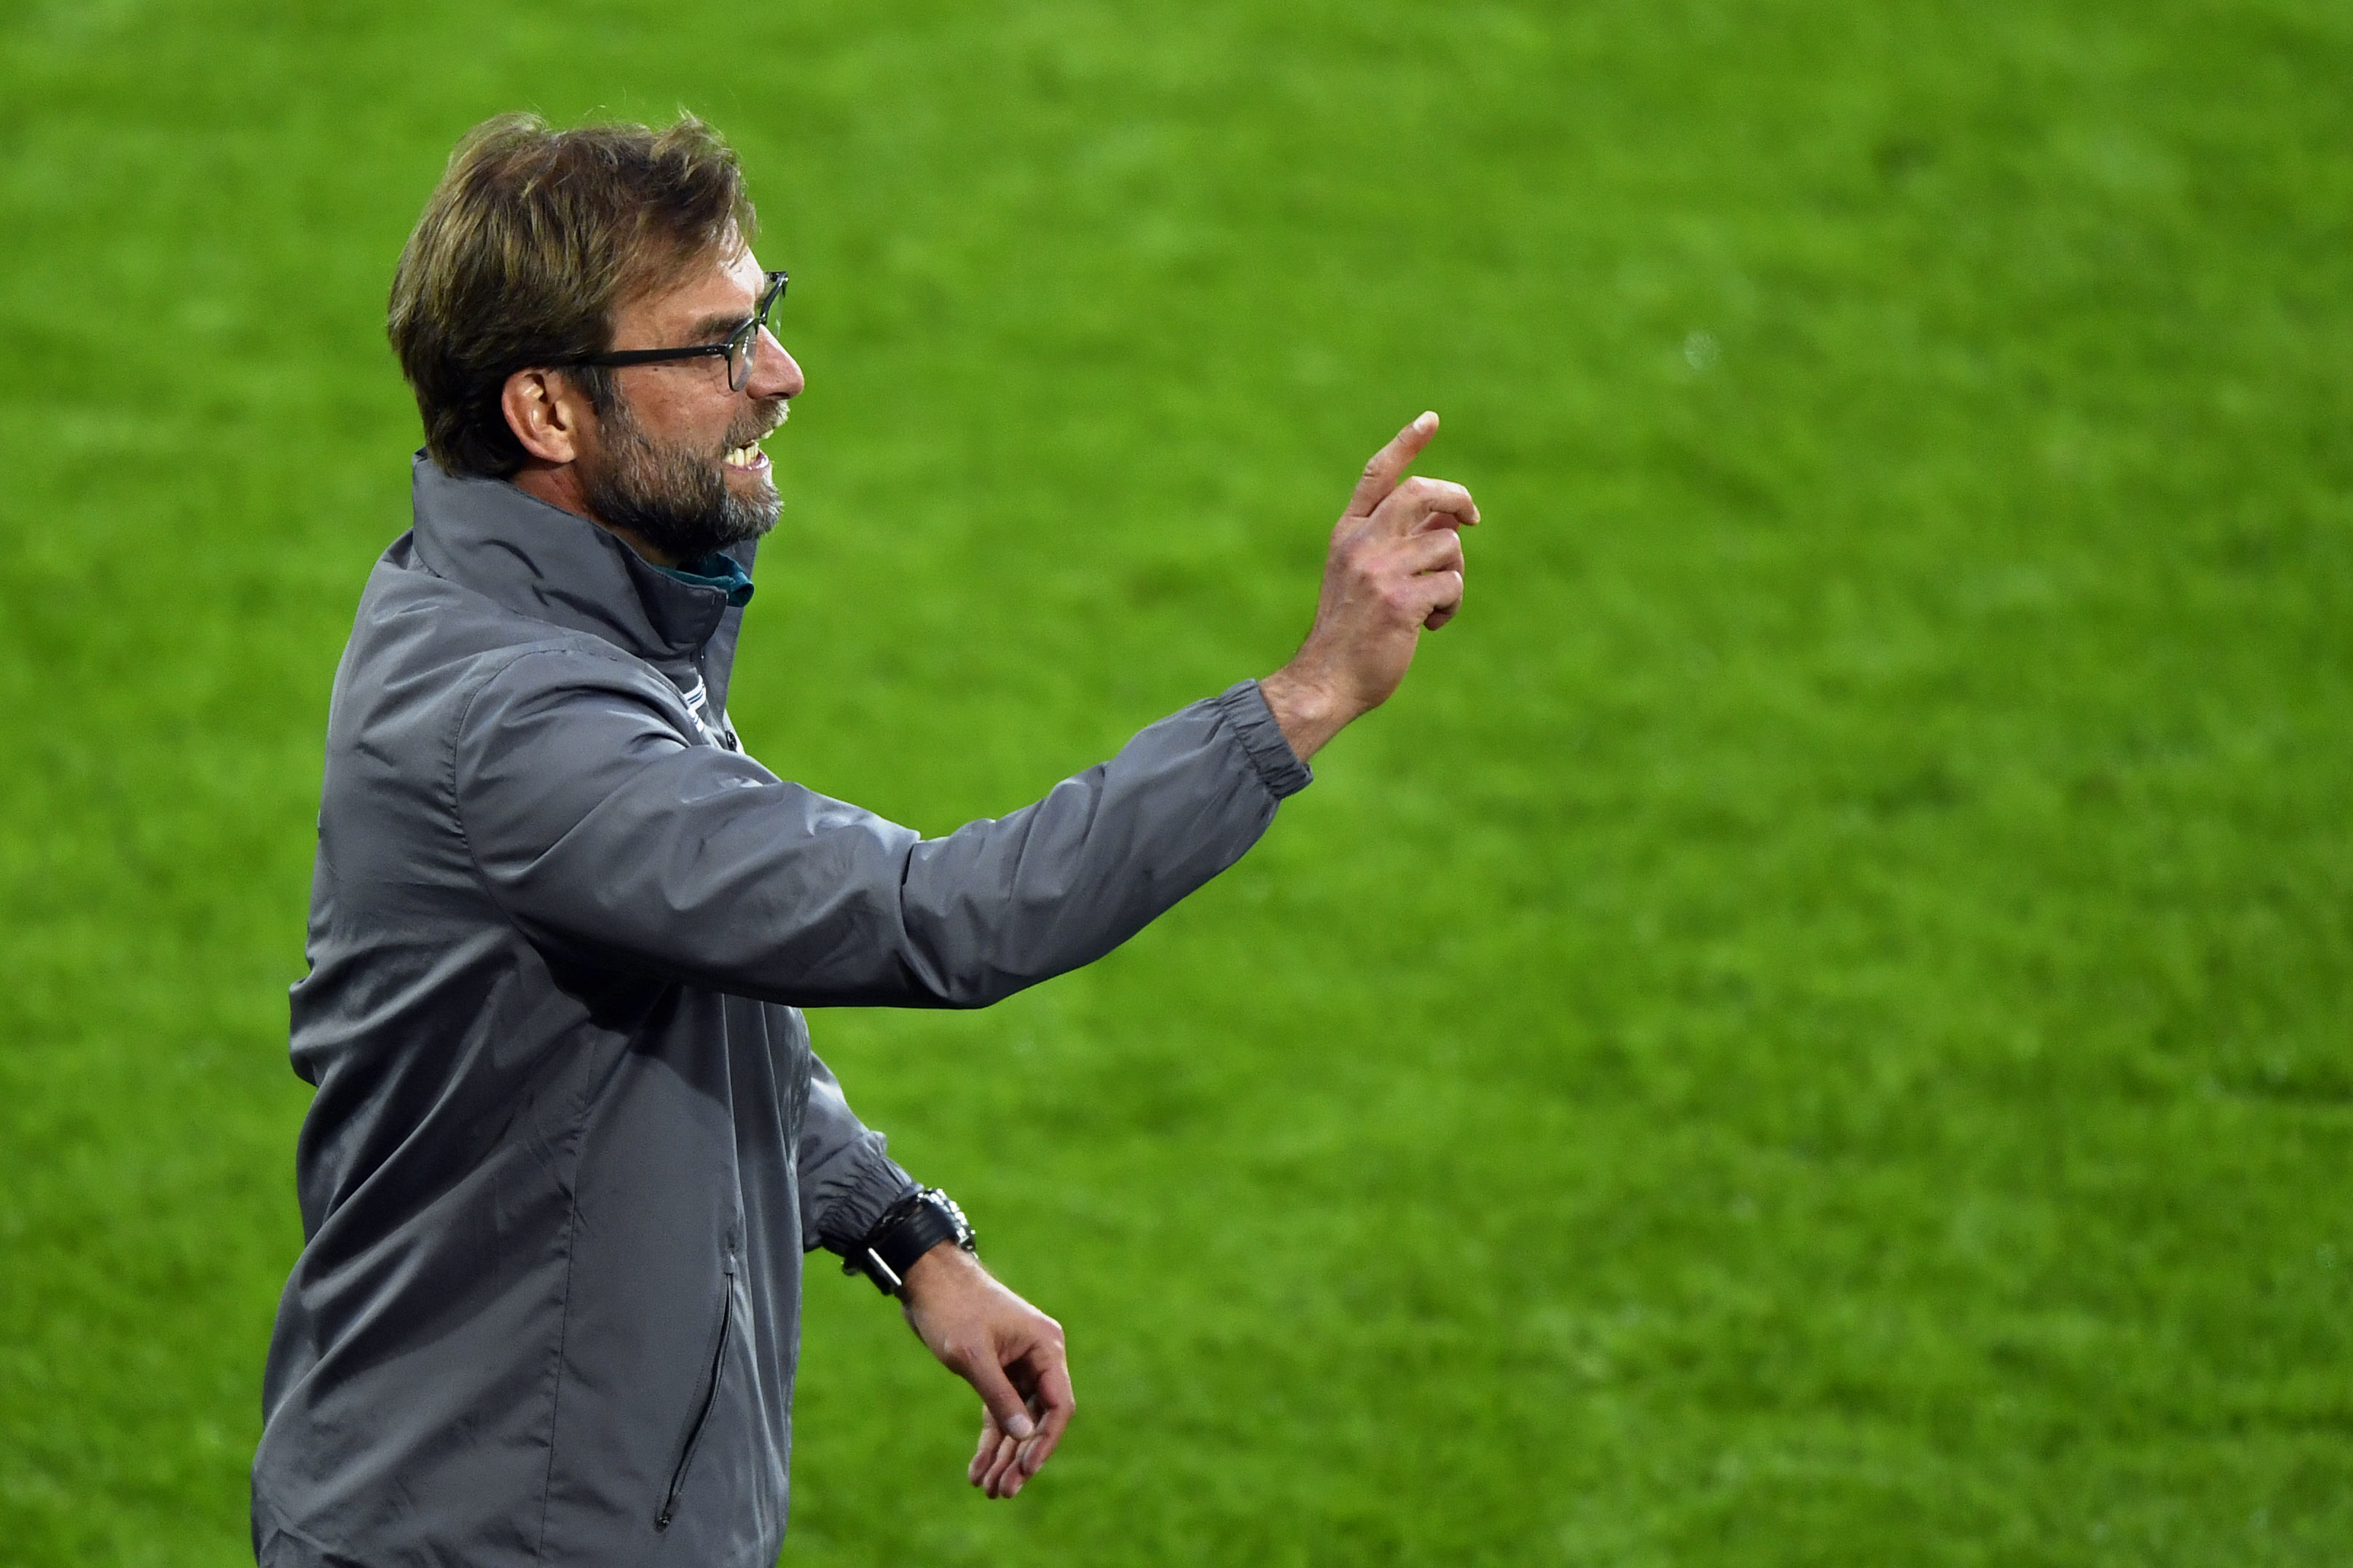 Liverpool's German head coach Jurgen Klopp  gestures during the UEFA Europa League final football match between Liverpool FC and Sevilla FC at the St Jakob-Park stadium in Basel, on May 18, 2016.   AFP PHOTO / FABRICE COFFRINI / AFP / FABRICE COFFRINI        (Photo credit should read FABRICE COFFRINI/AFP/Getty Images)